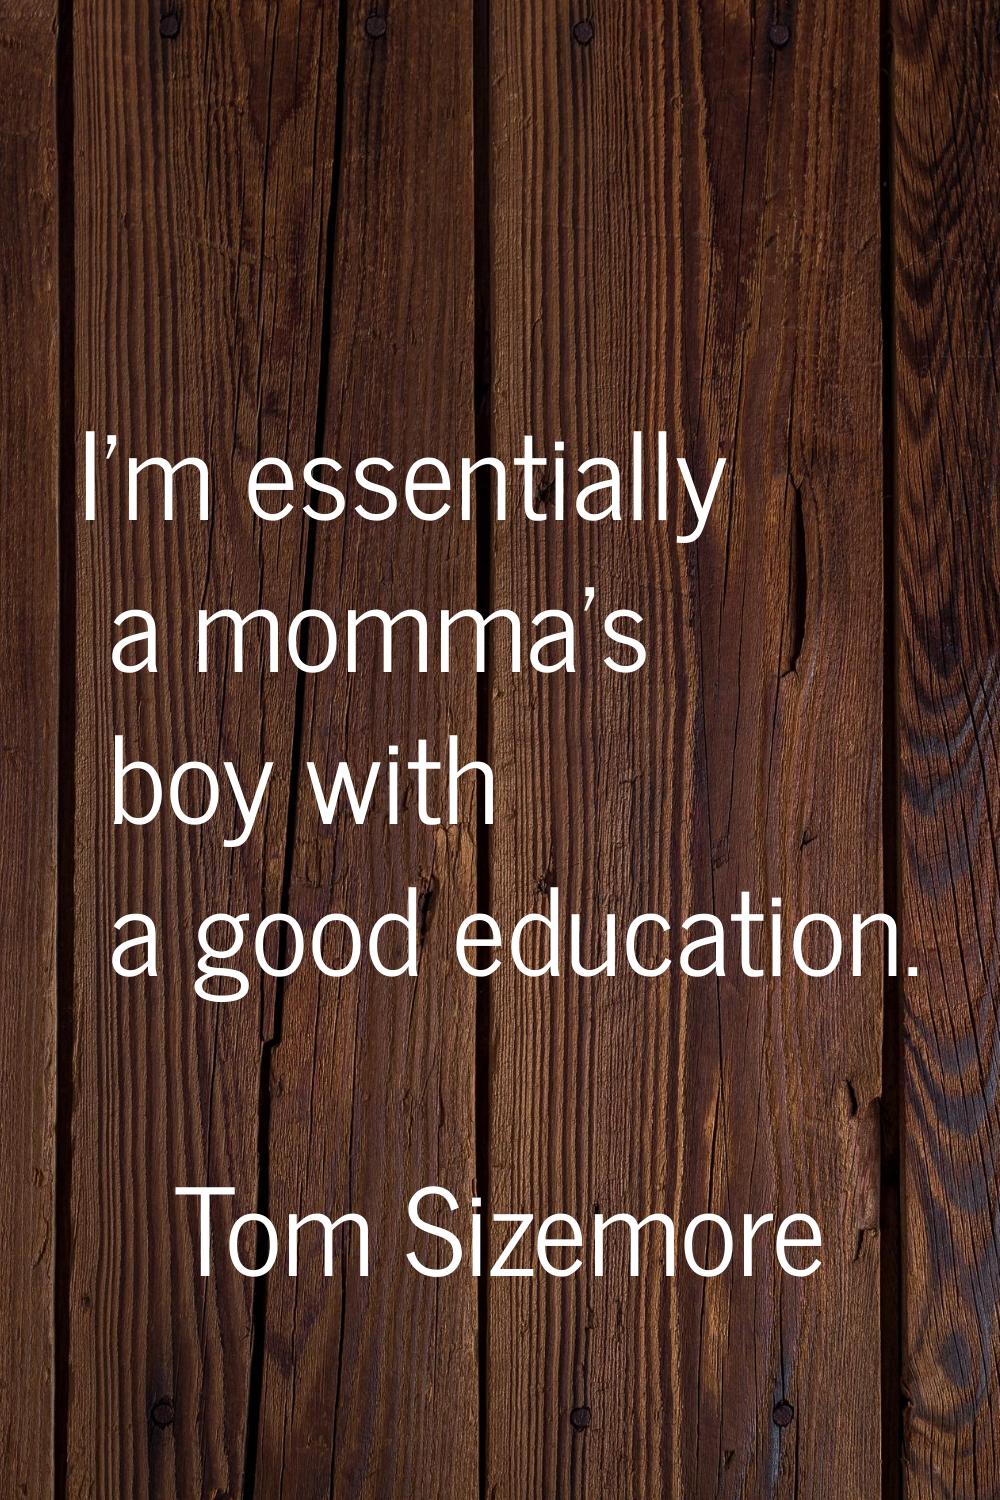 I'm essentially a momma's boy with a good education.